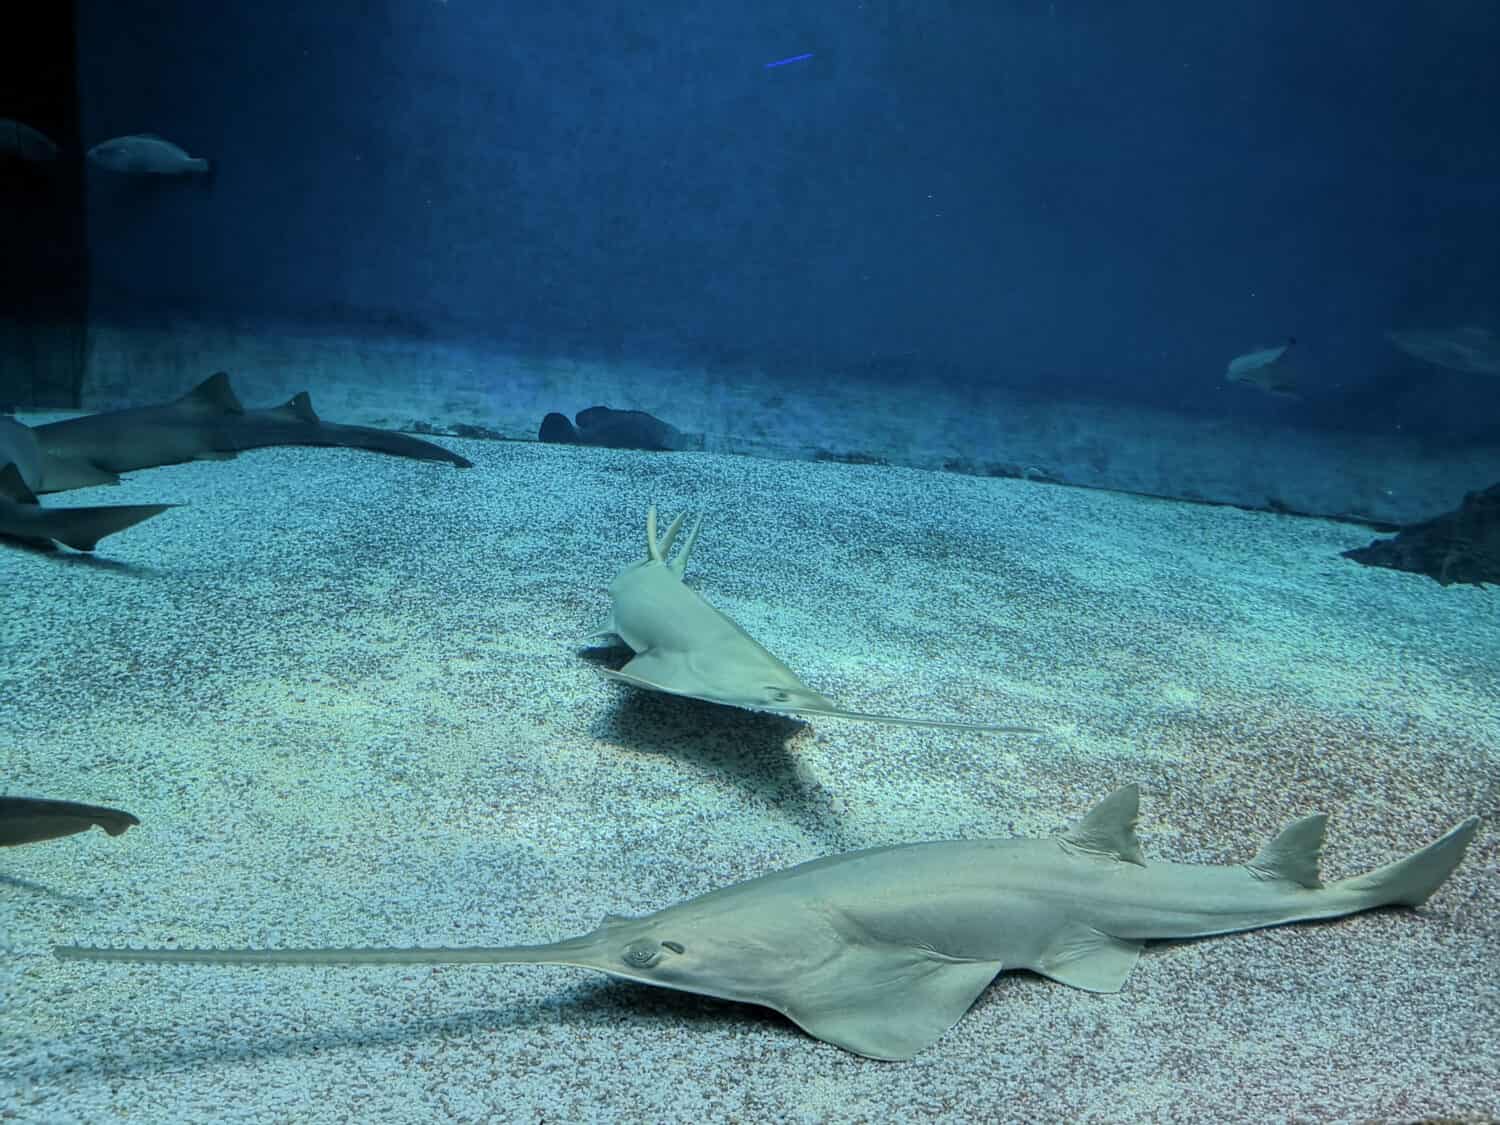 Longcomb sawfish is now considered a critically endangered species